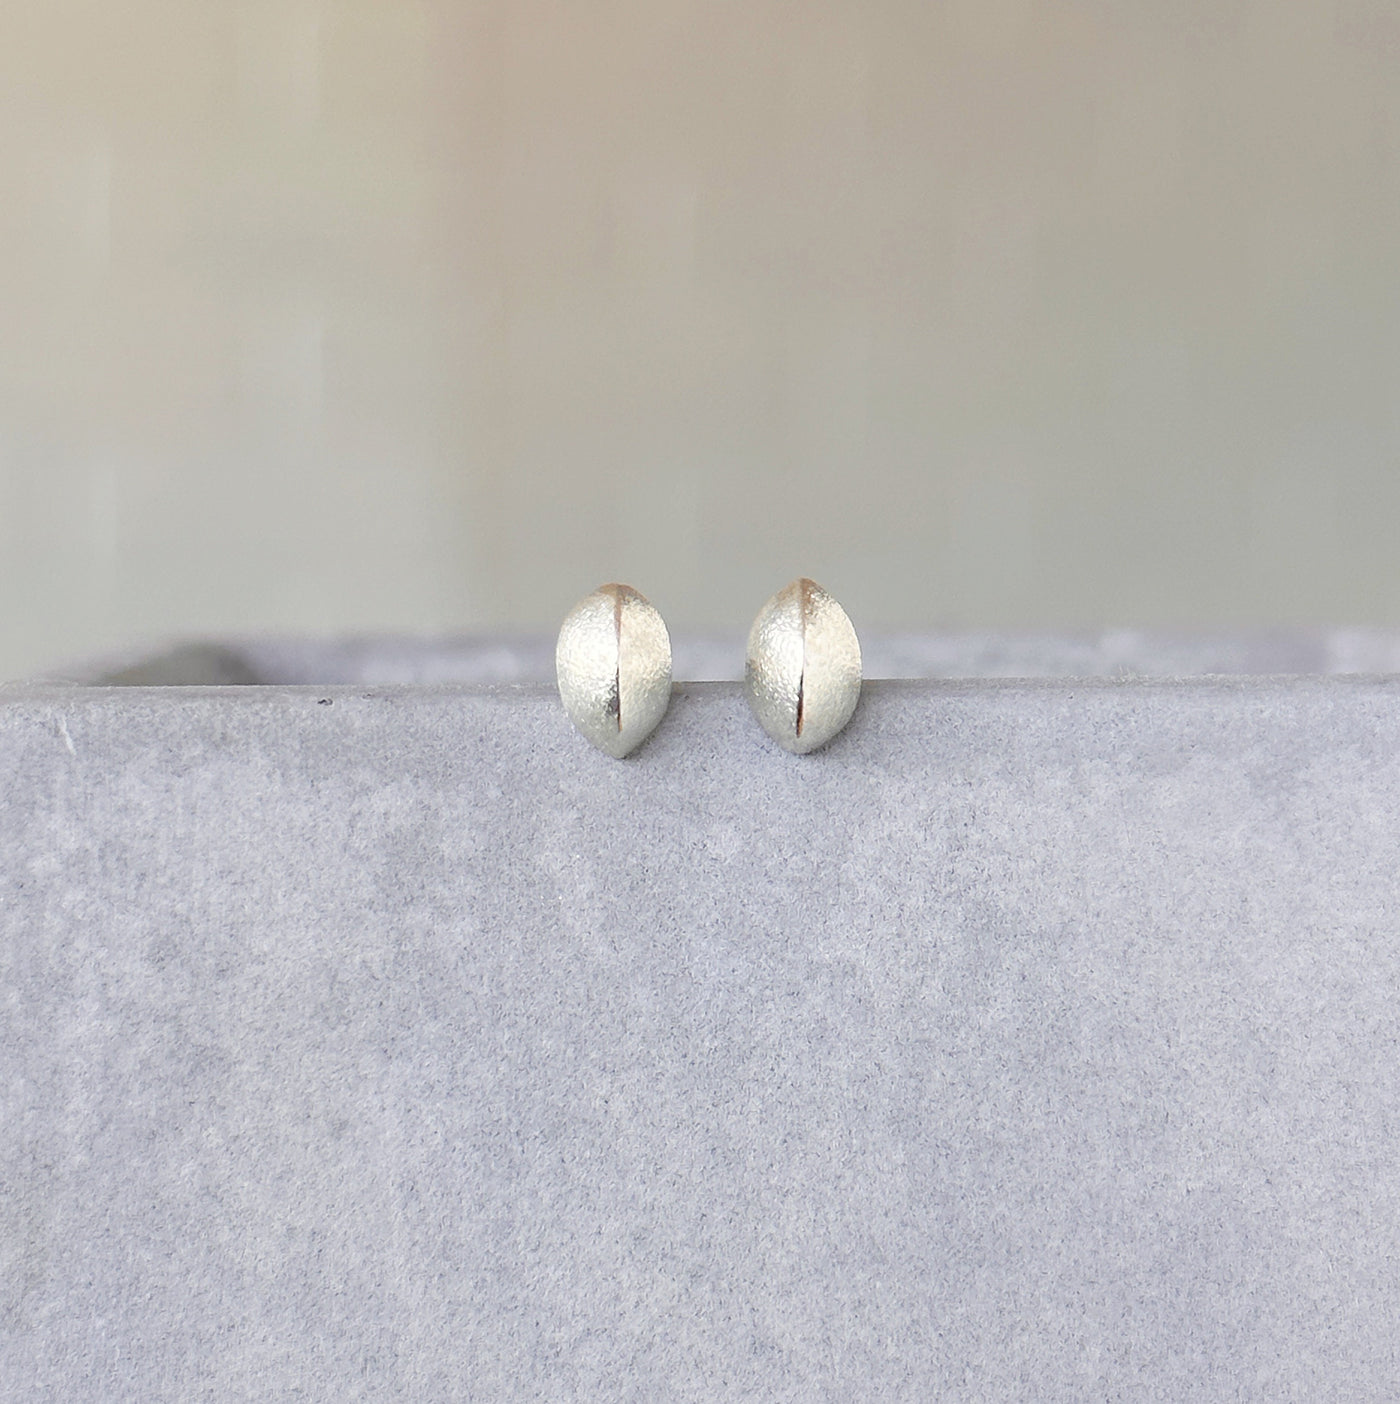 Silver Dewdrop Studs on a concrete table in front of a white wall, front angle